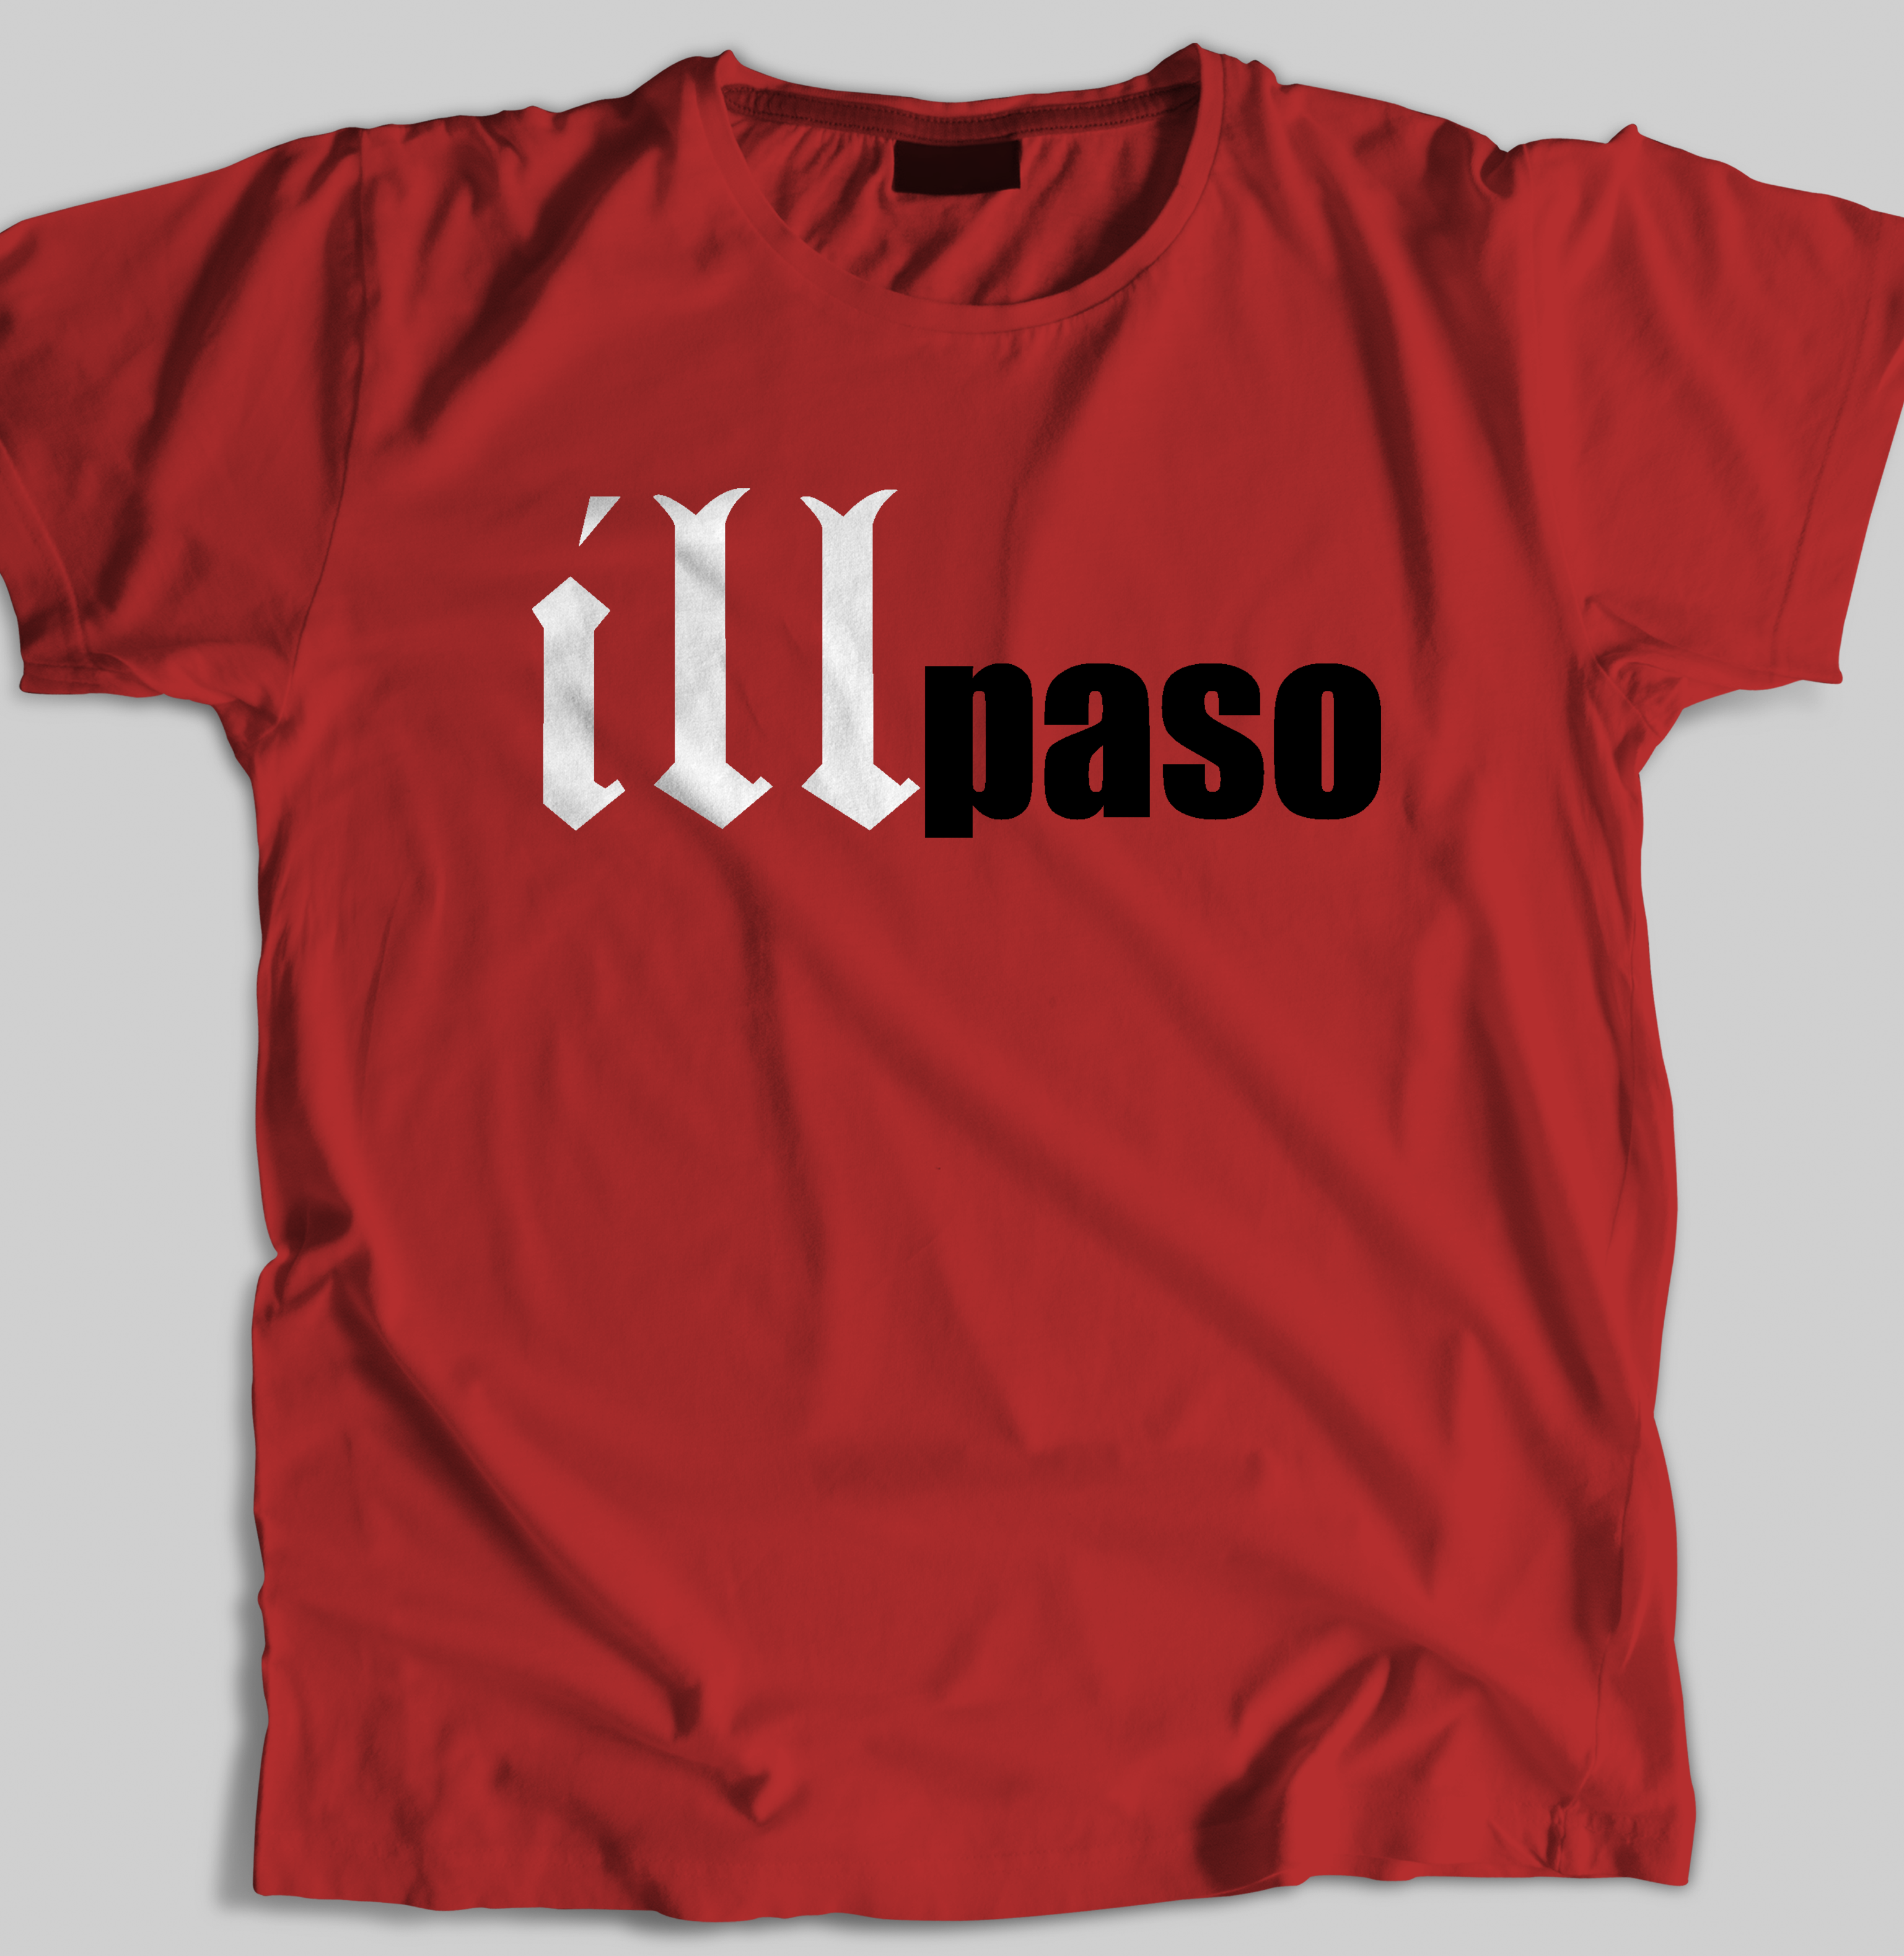 "illmatic Tribute" Men's T-shirt (Red) by illpaso